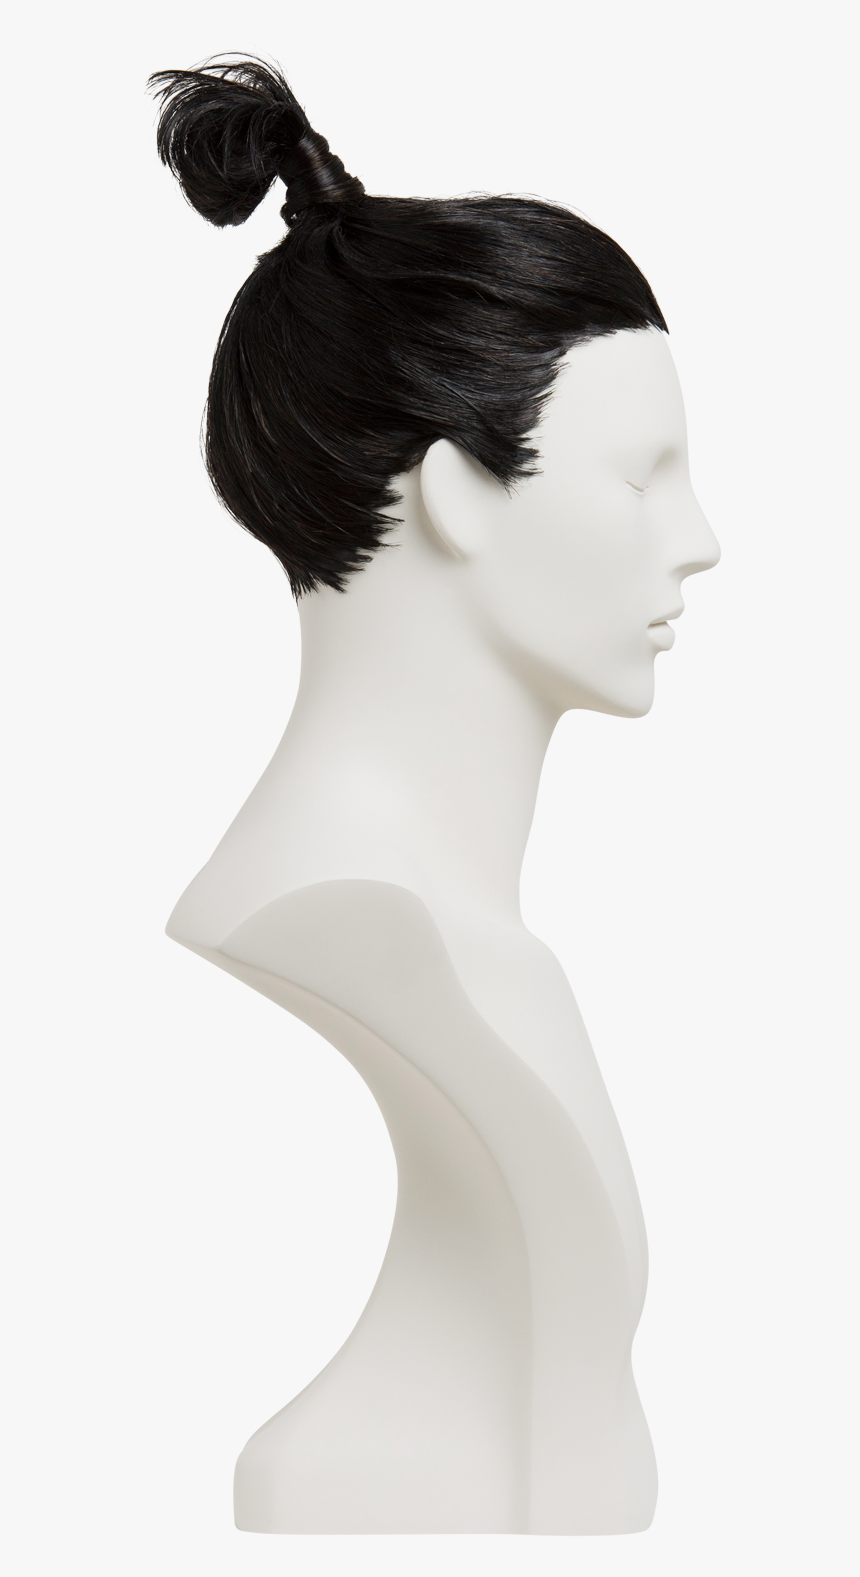 Male - Mannequin - Mannequin, HD Png Download, Free Download